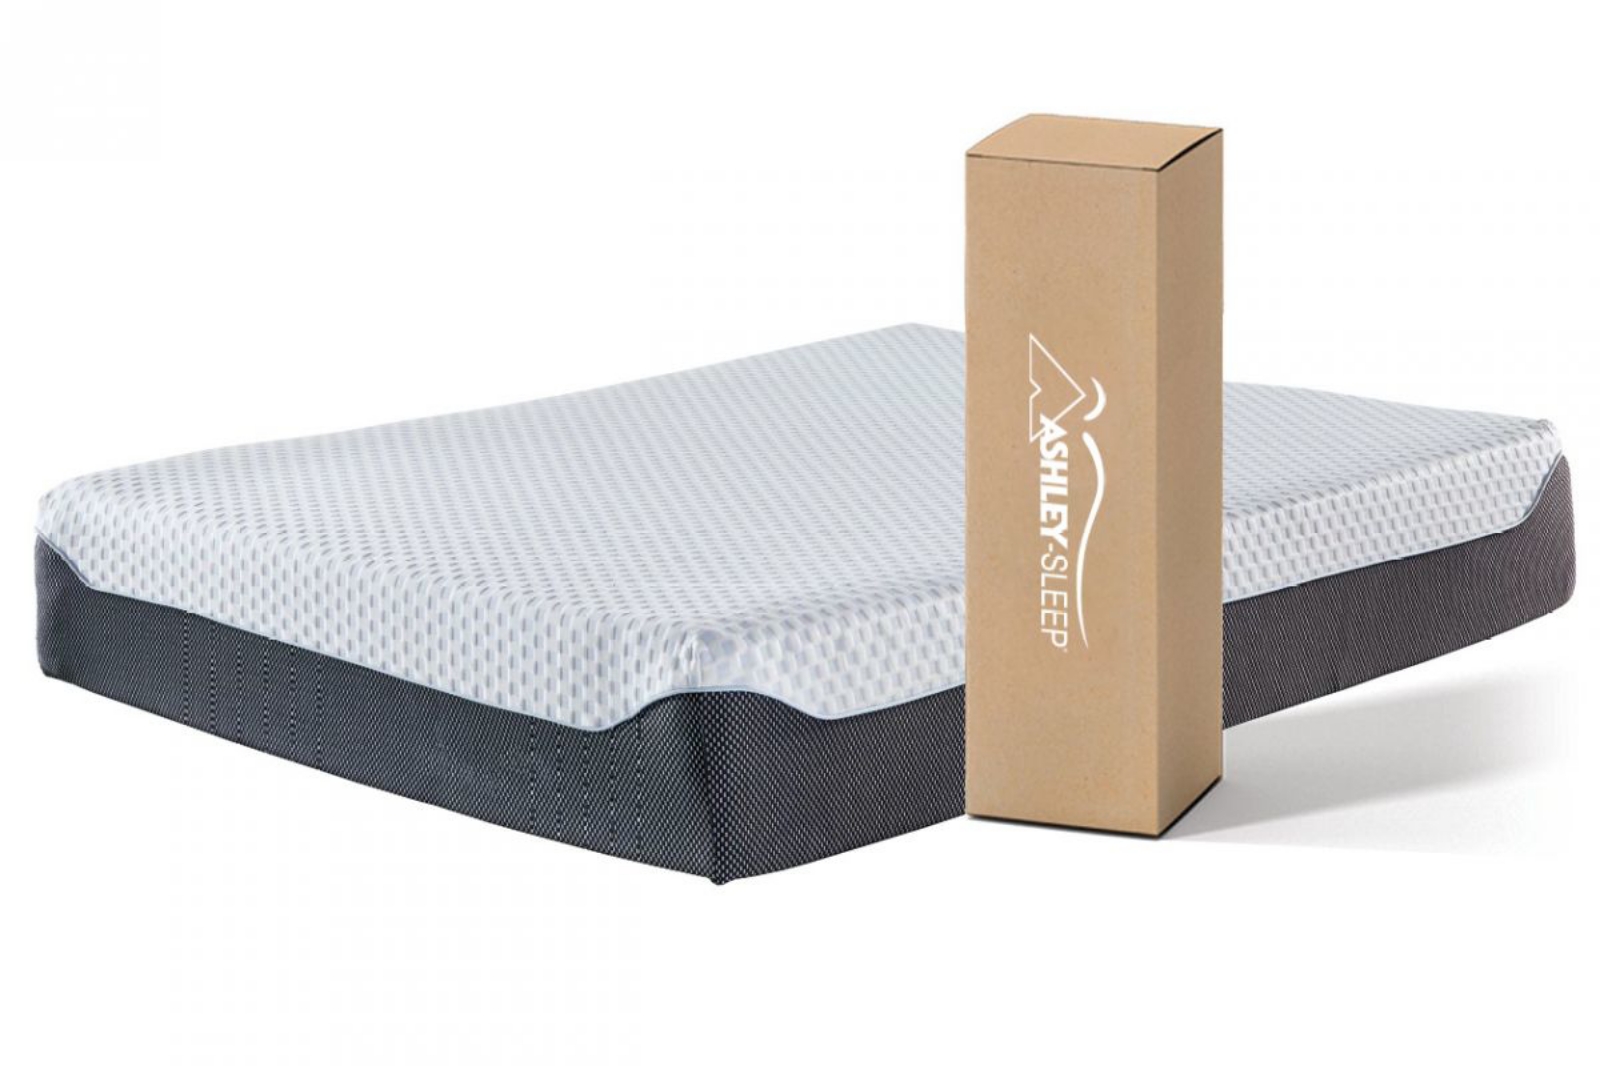 Picture of Gruve 12 Inch Queen Mattress